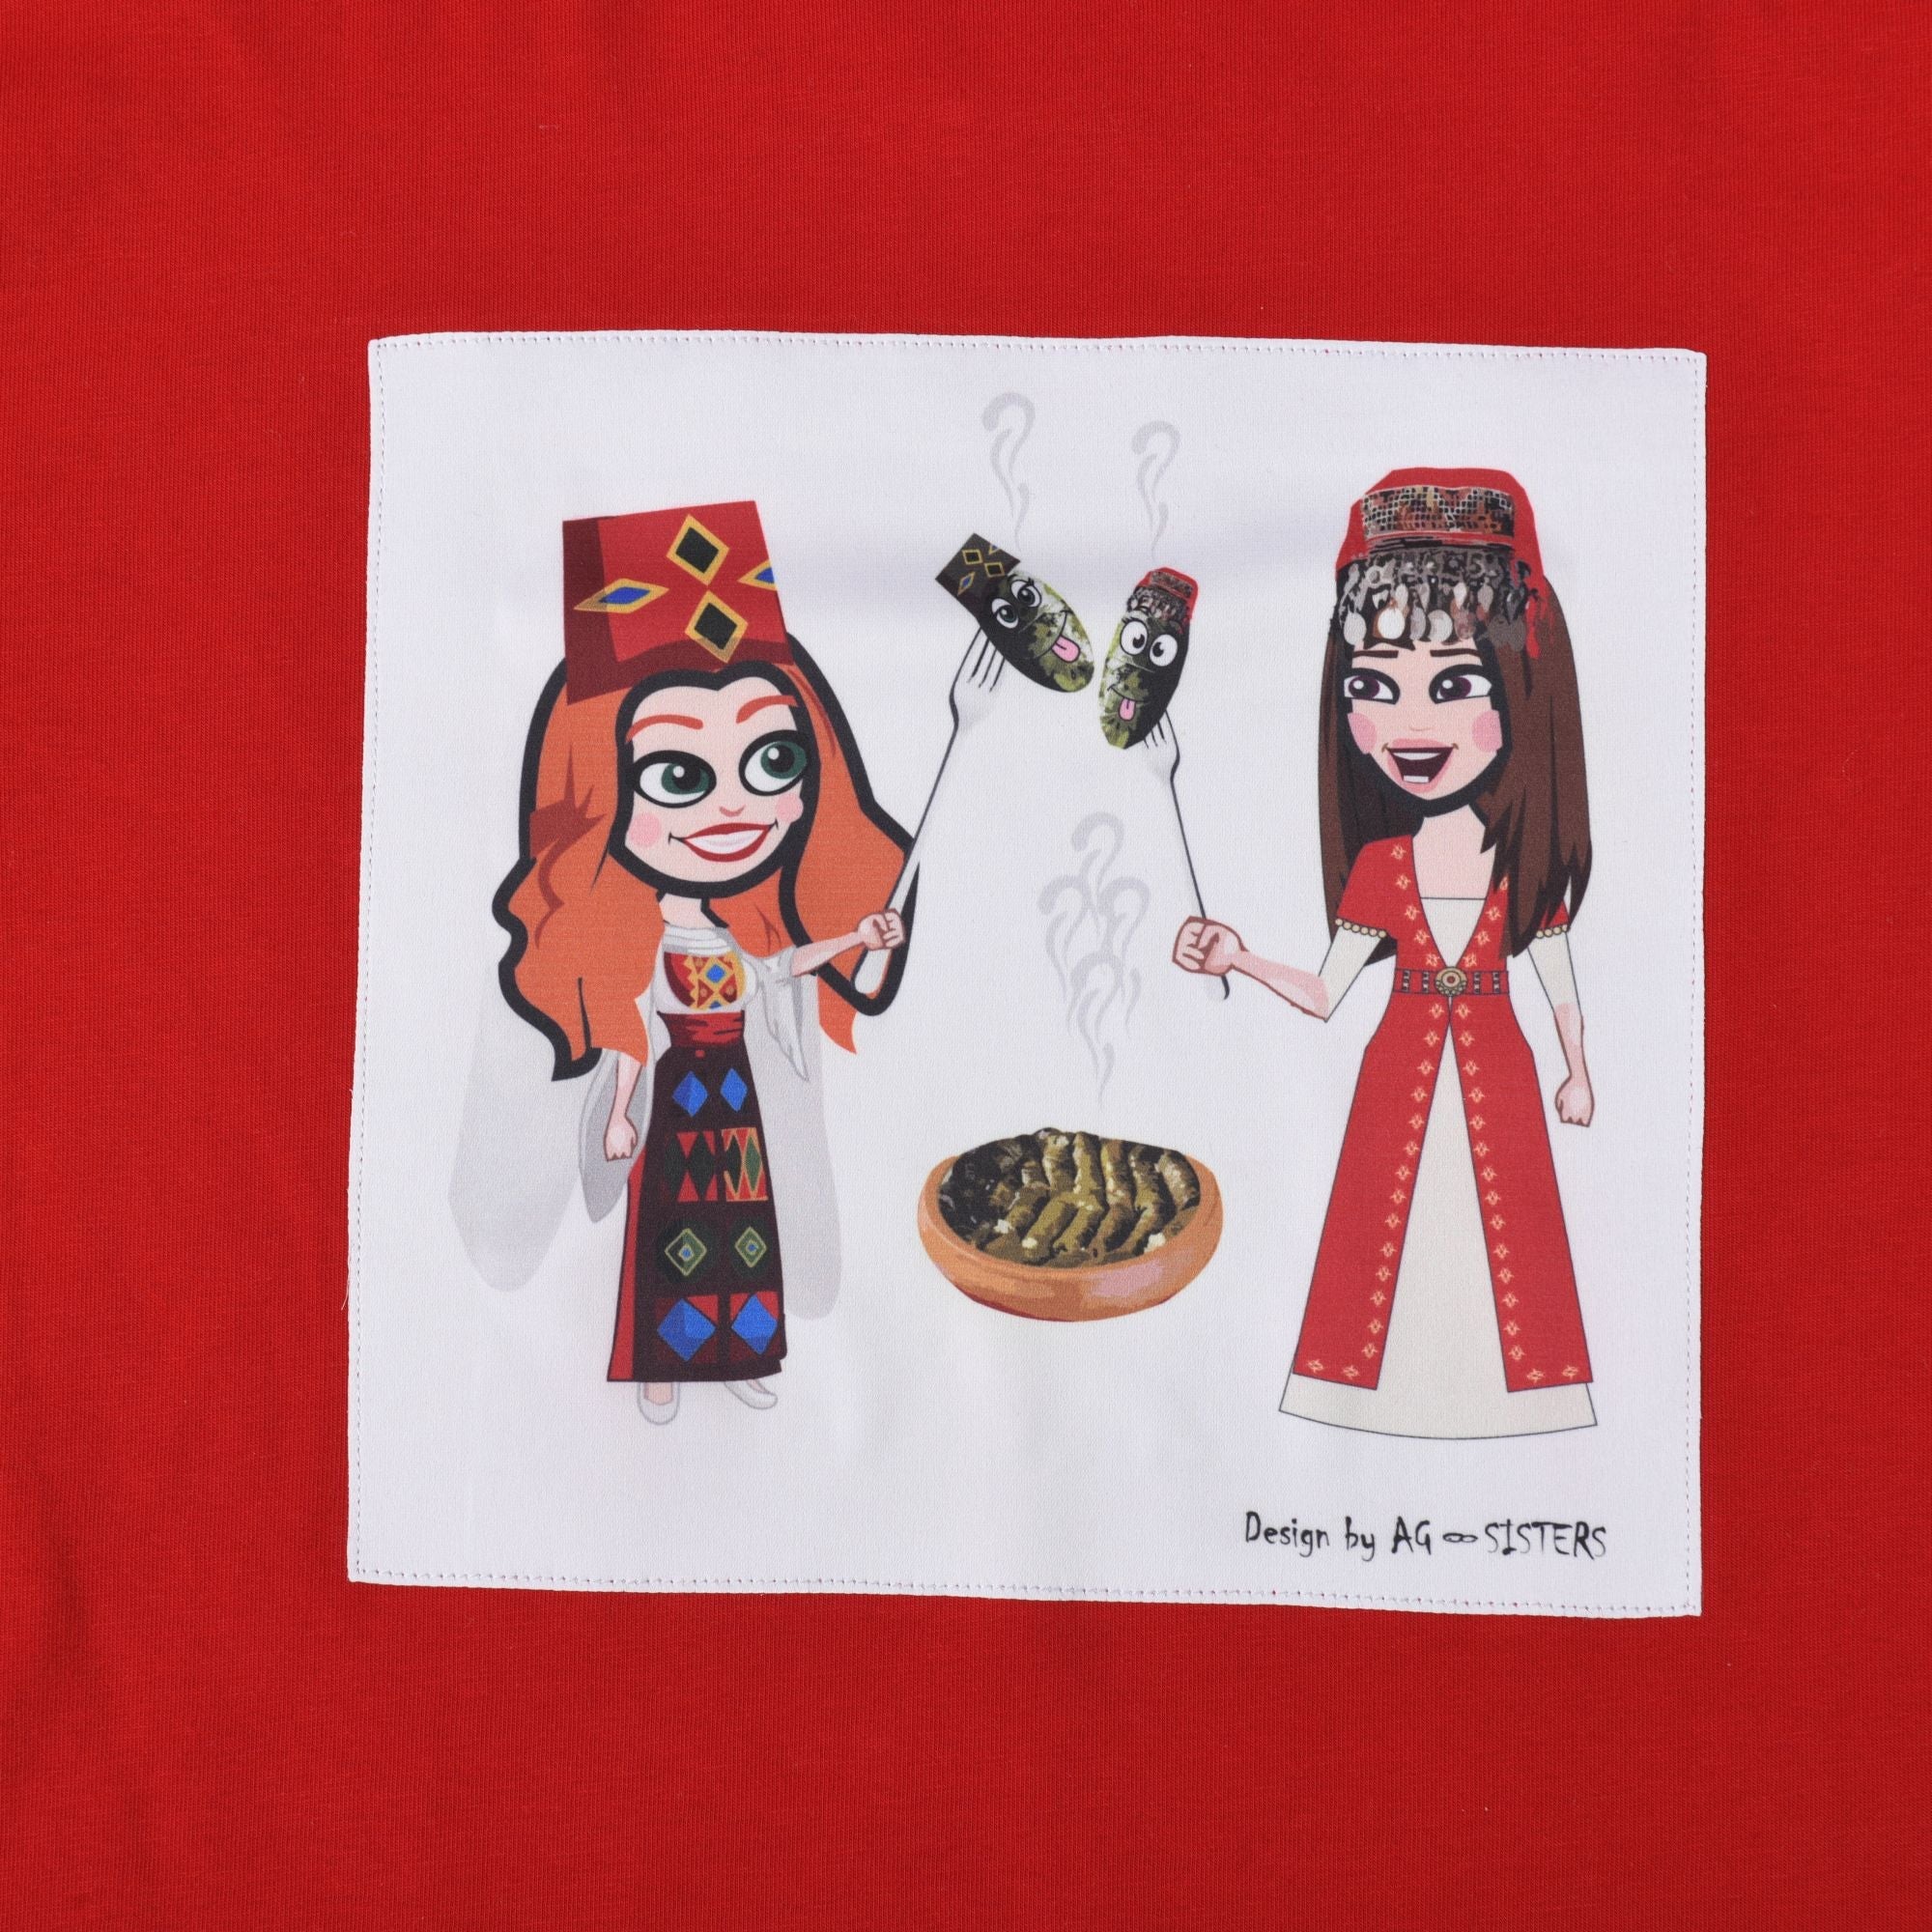 AG Sisters T-Shirt Red